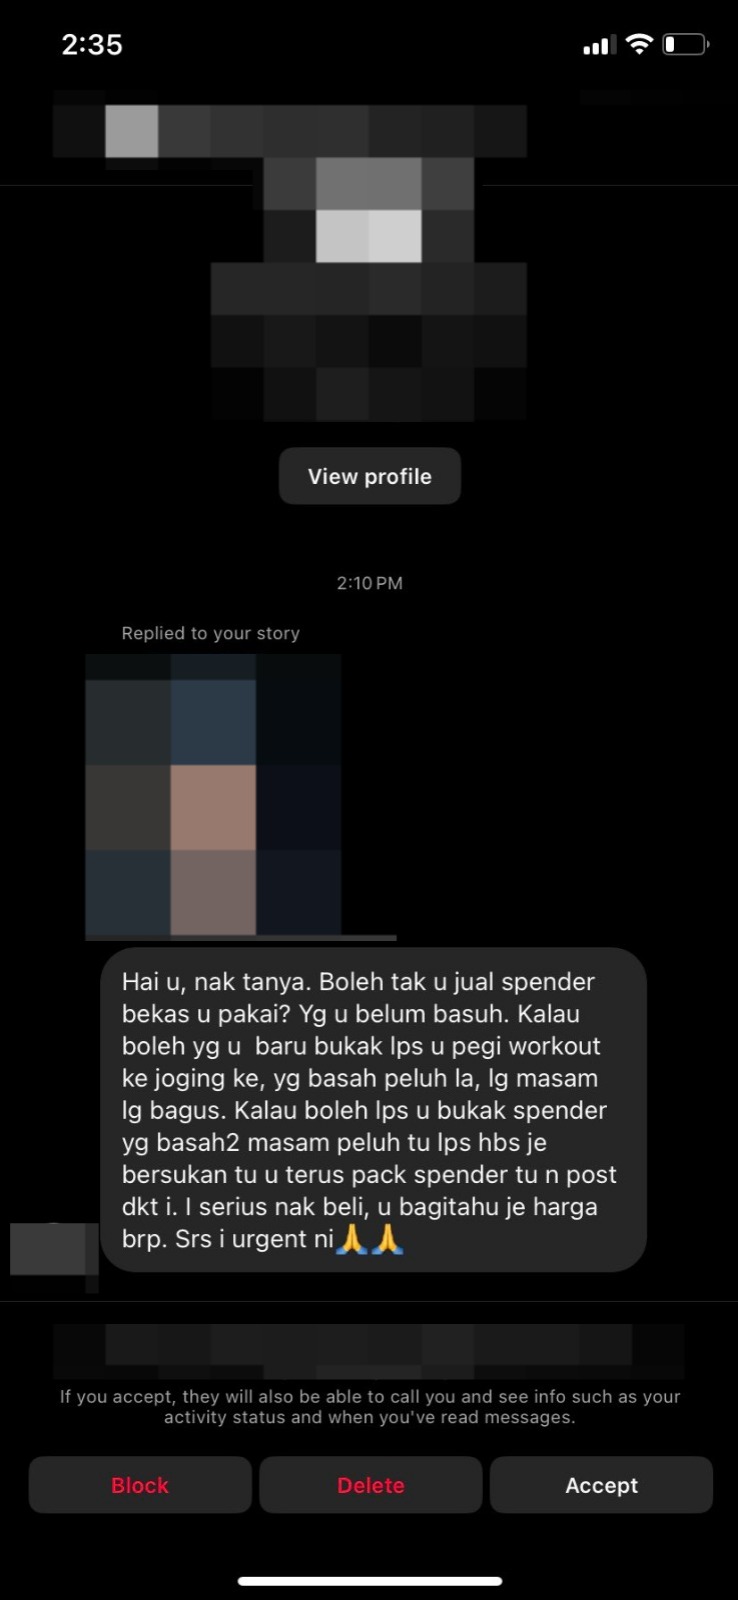 A screenshot shared by a m'sian woman shows a lewd message she received from one of her instagram followers.